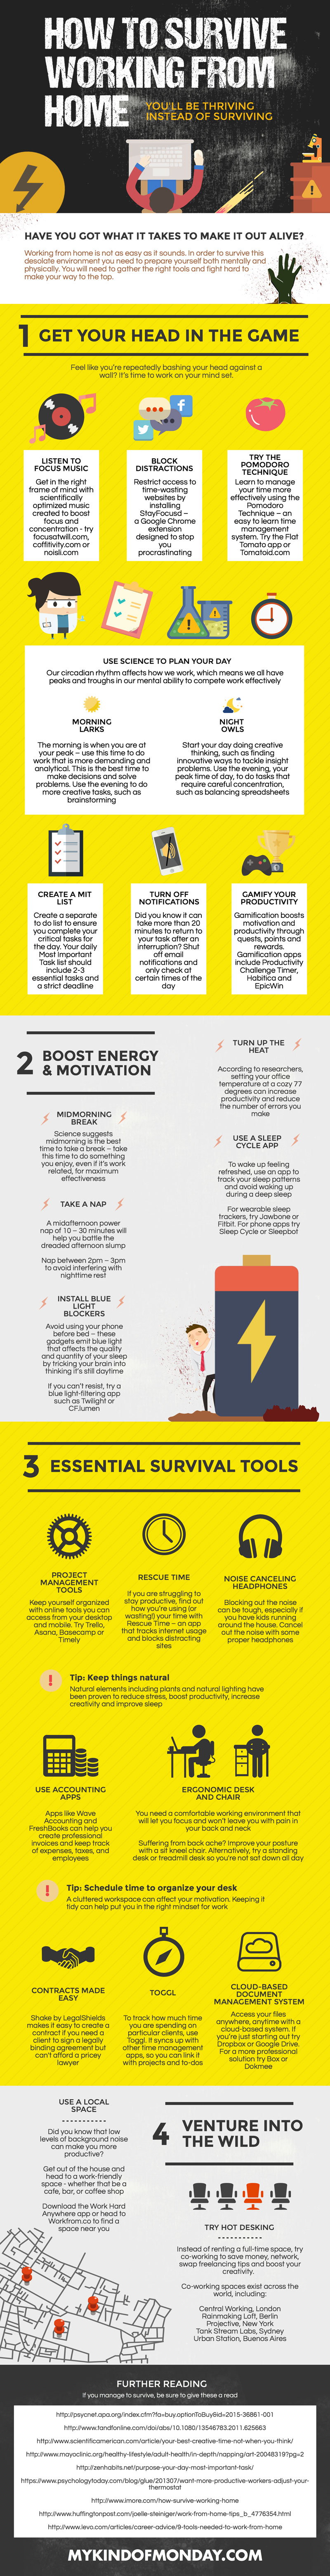 infographic-survive-working-from-home